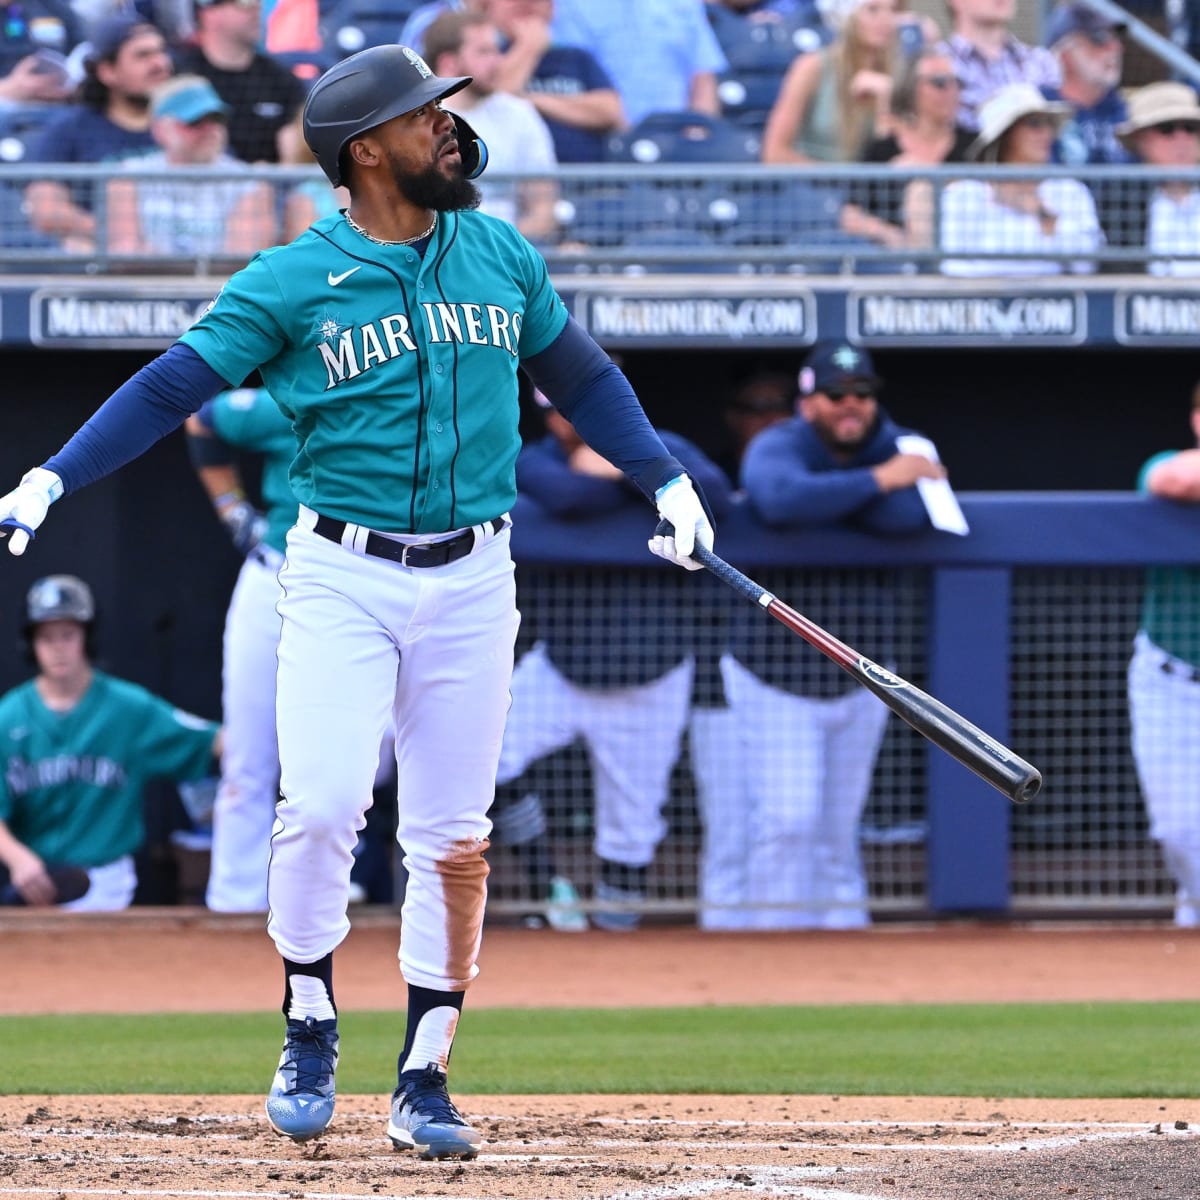 Trident true: Mariners get first win in City Connect jerseys as Teoscar  Hernandez hits go-ahead solo shot late — Converge Media